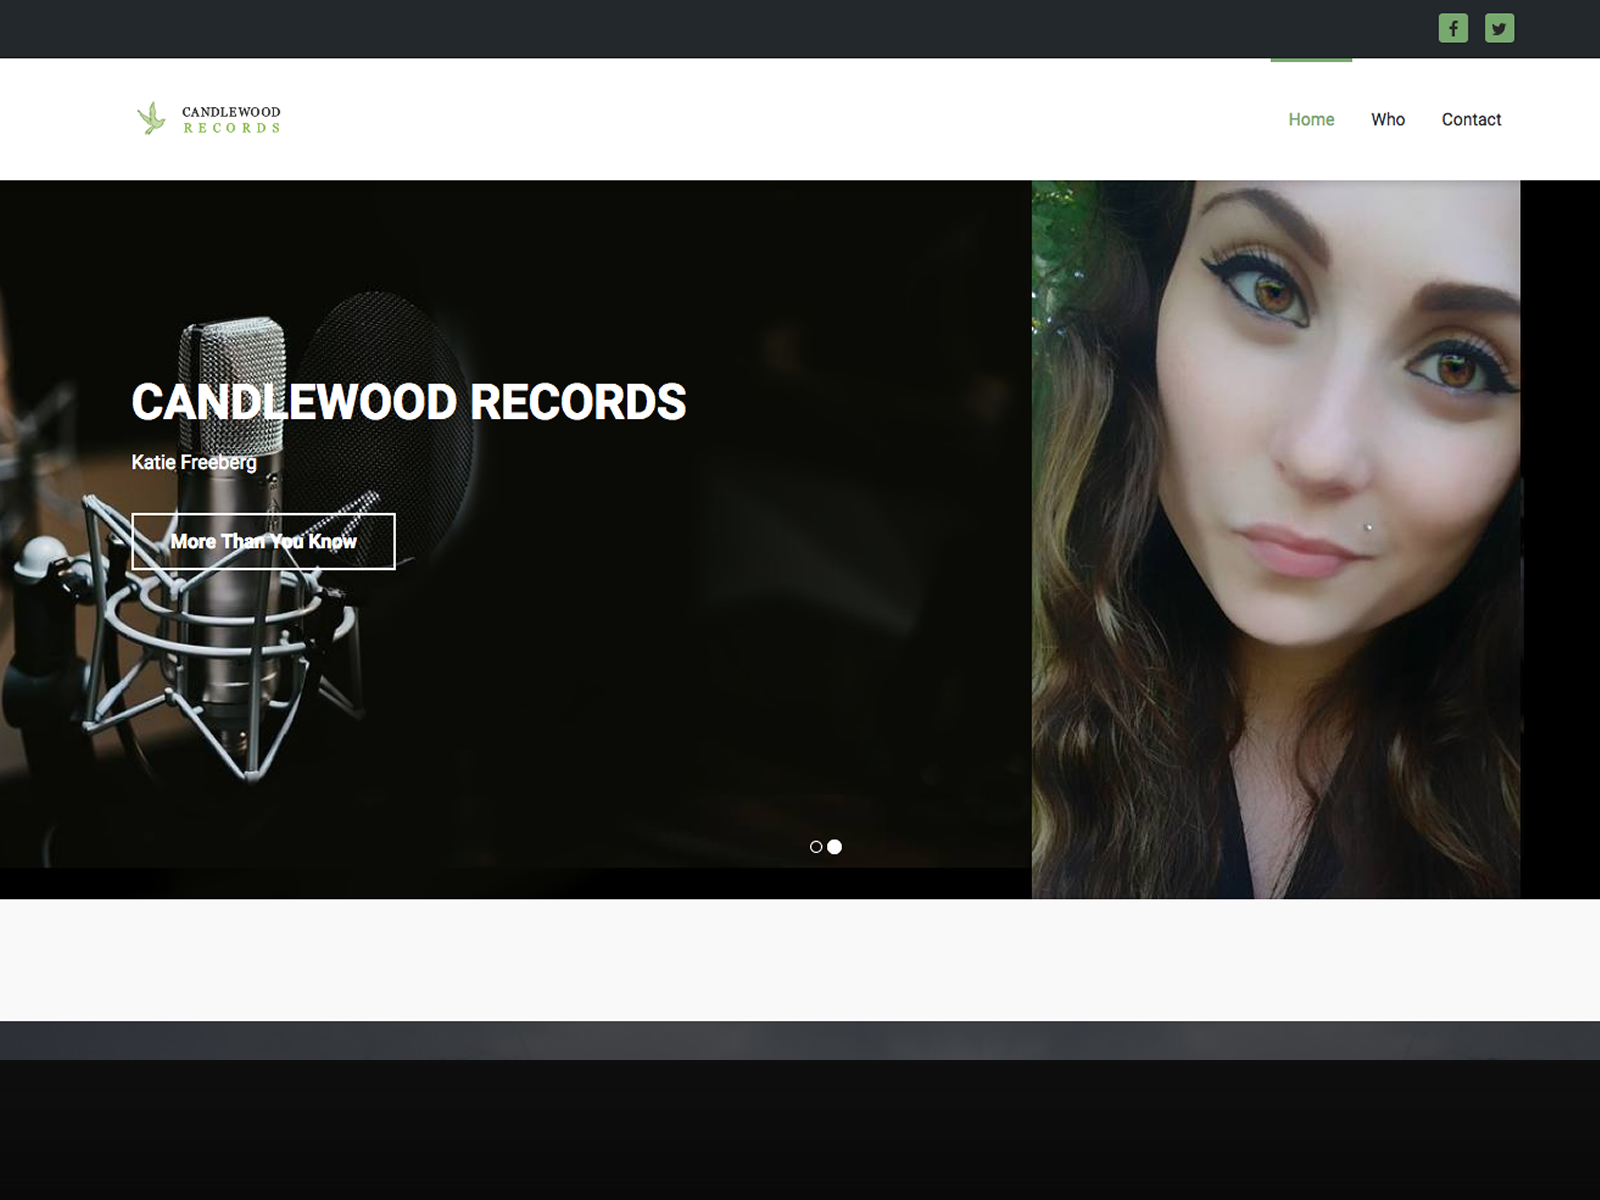 Candlewood Records